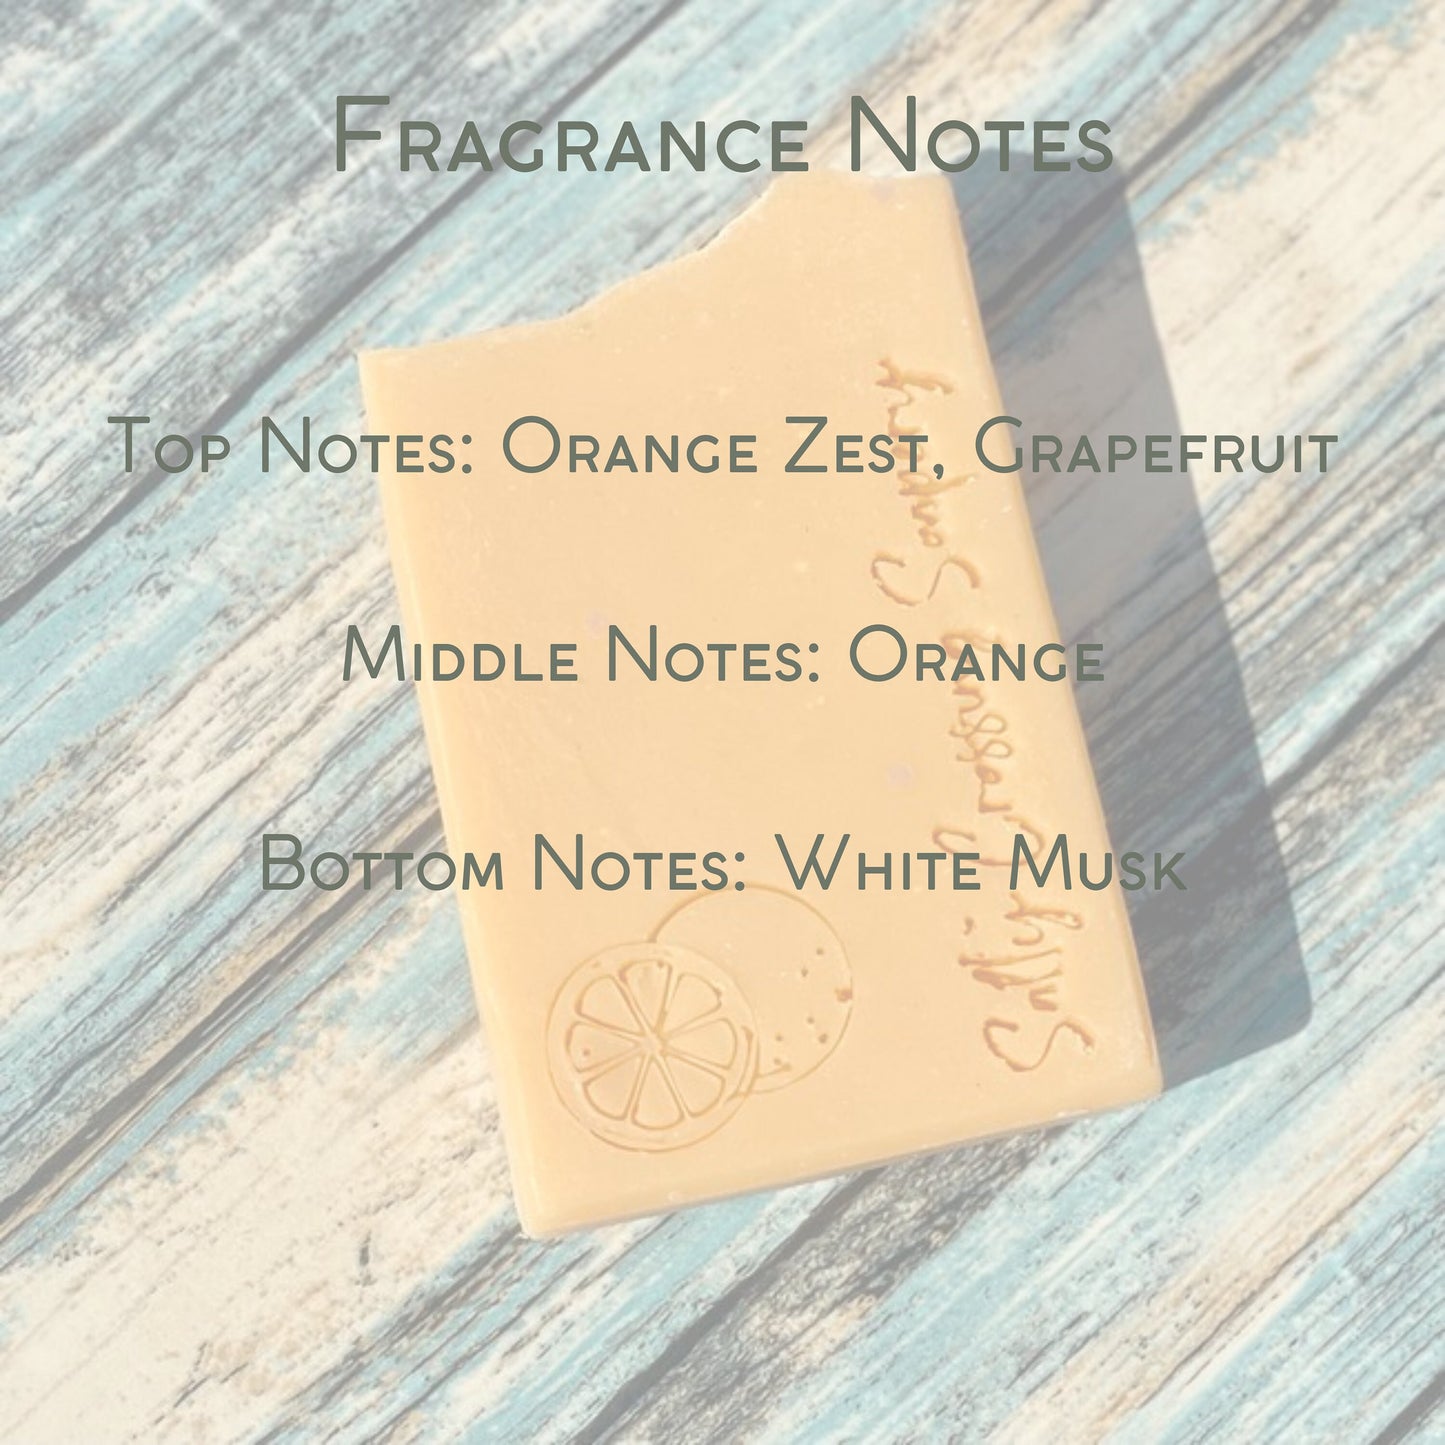 fragrance notes graphic. top notes orange zest and grapefruit. middle notes orange. bottom notes white musk.